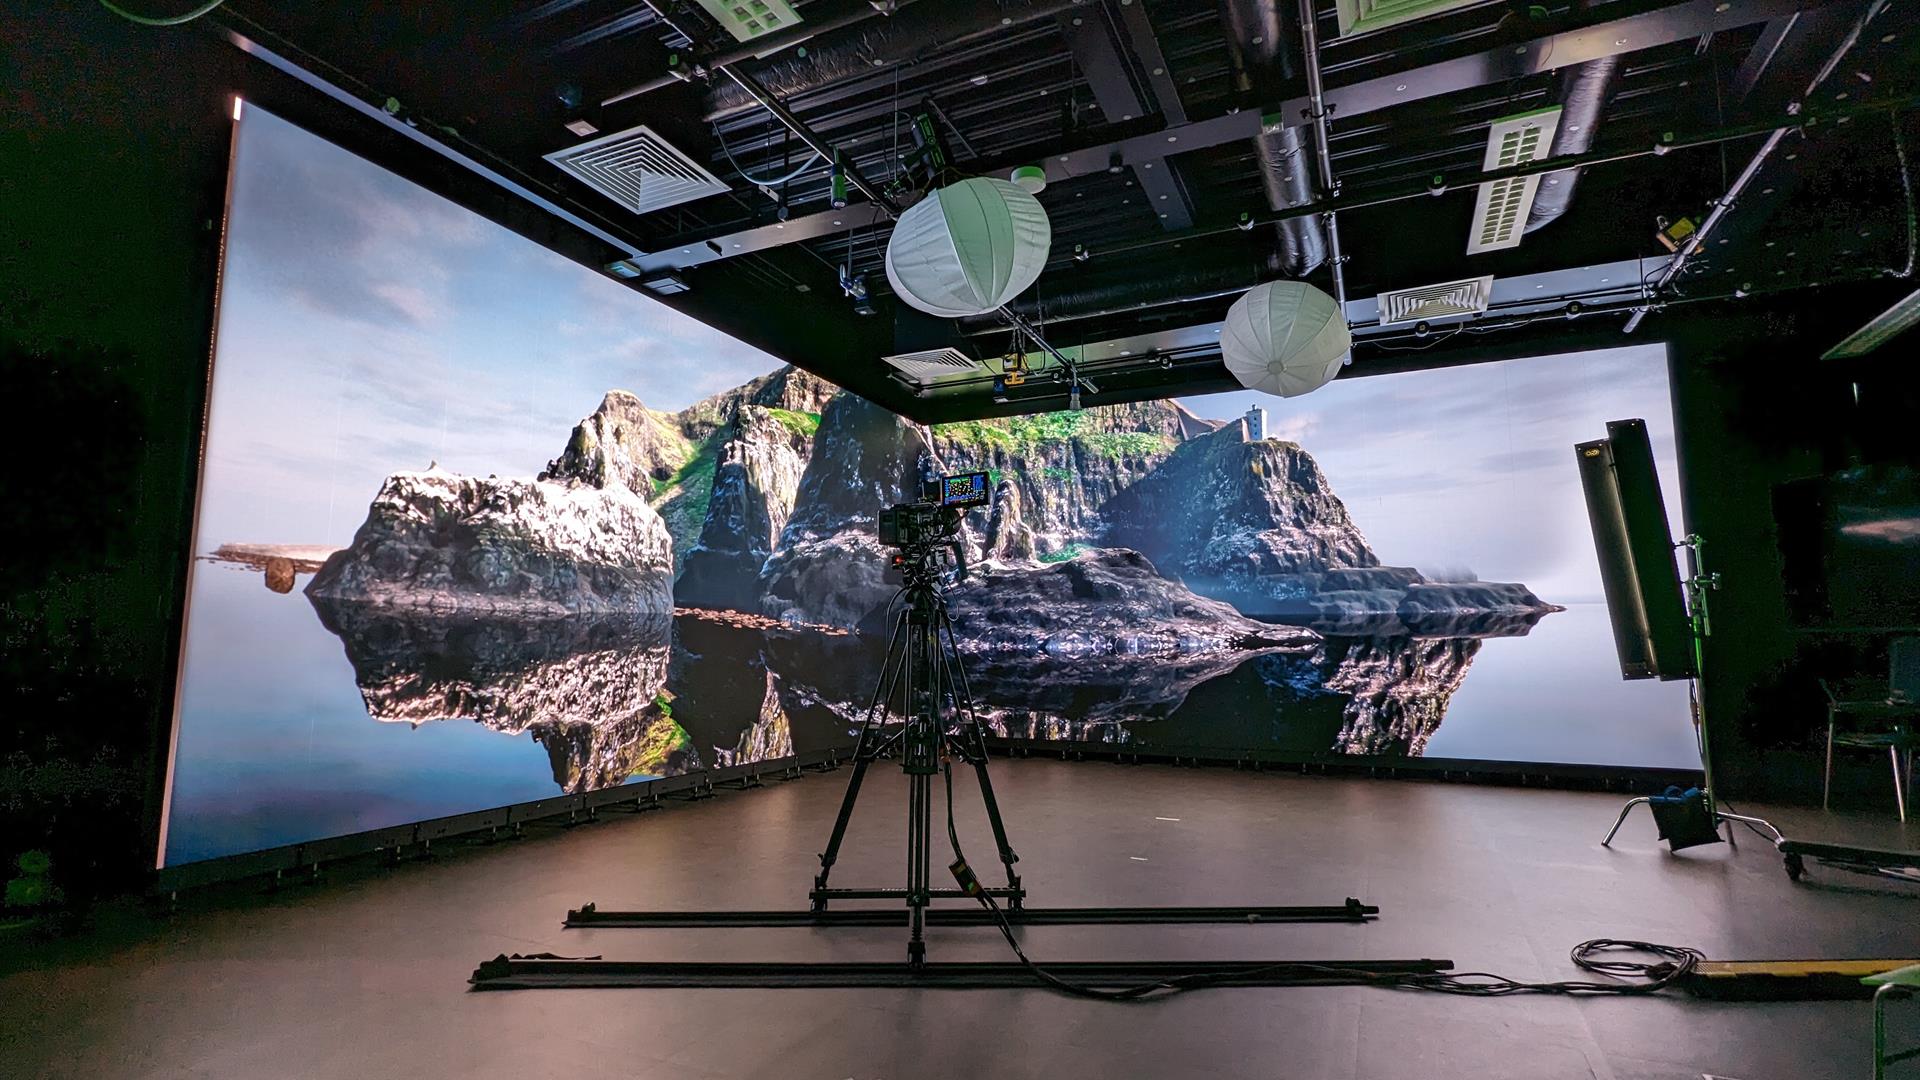 a camera is placed in front of a large double digital screen projecting an image of Rathlin Island